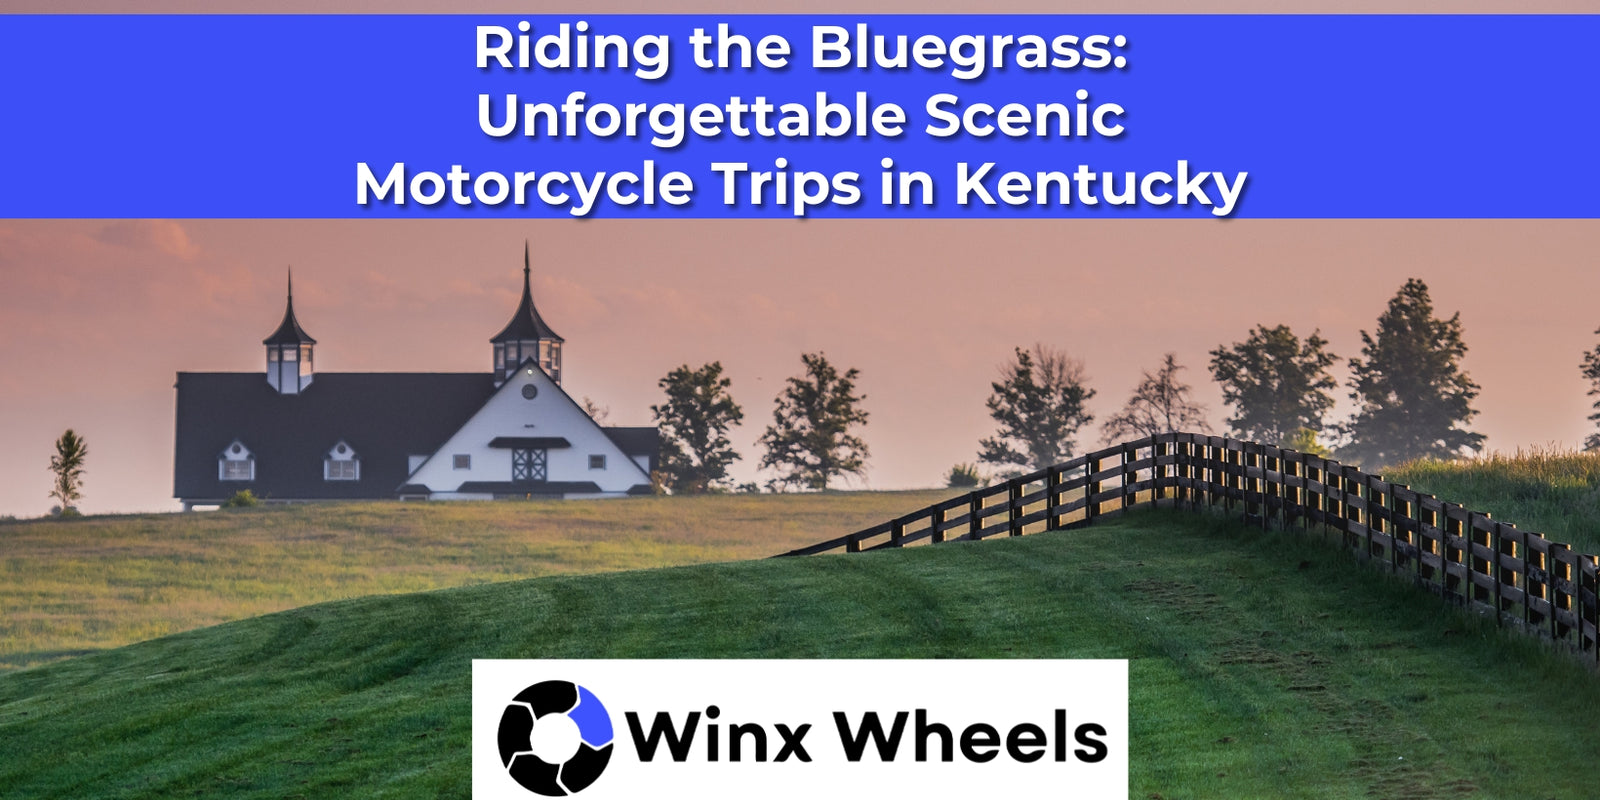 Riding the Bluegrass: Unforgettable Scenic Motorcycle Trips in Kentucky